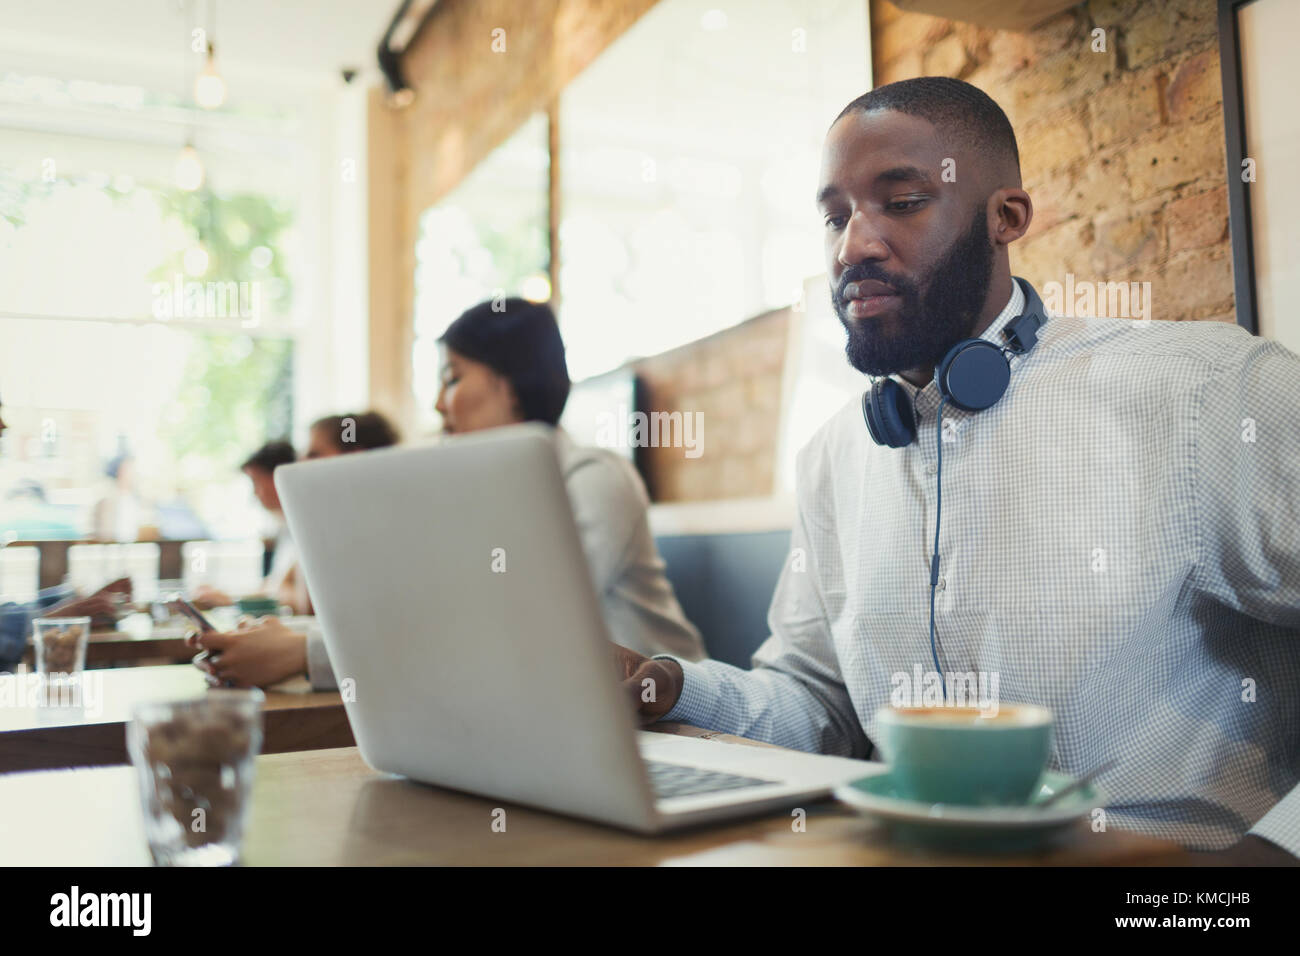 Young man with headphones using laptop and drinking coffee in cafe Stock Photo